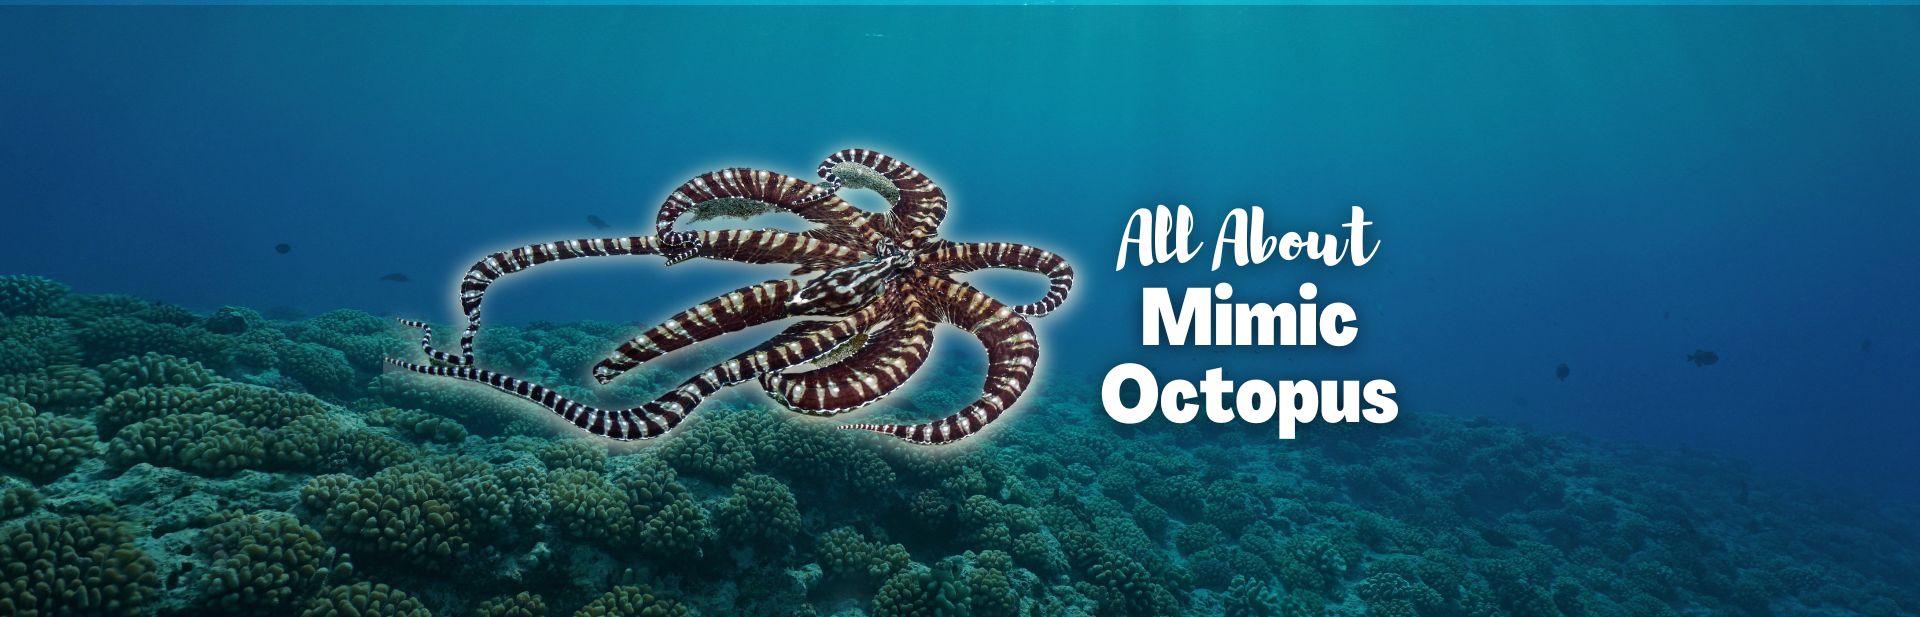 The Mysterious Mimic Octopus: The Master Of Disguise